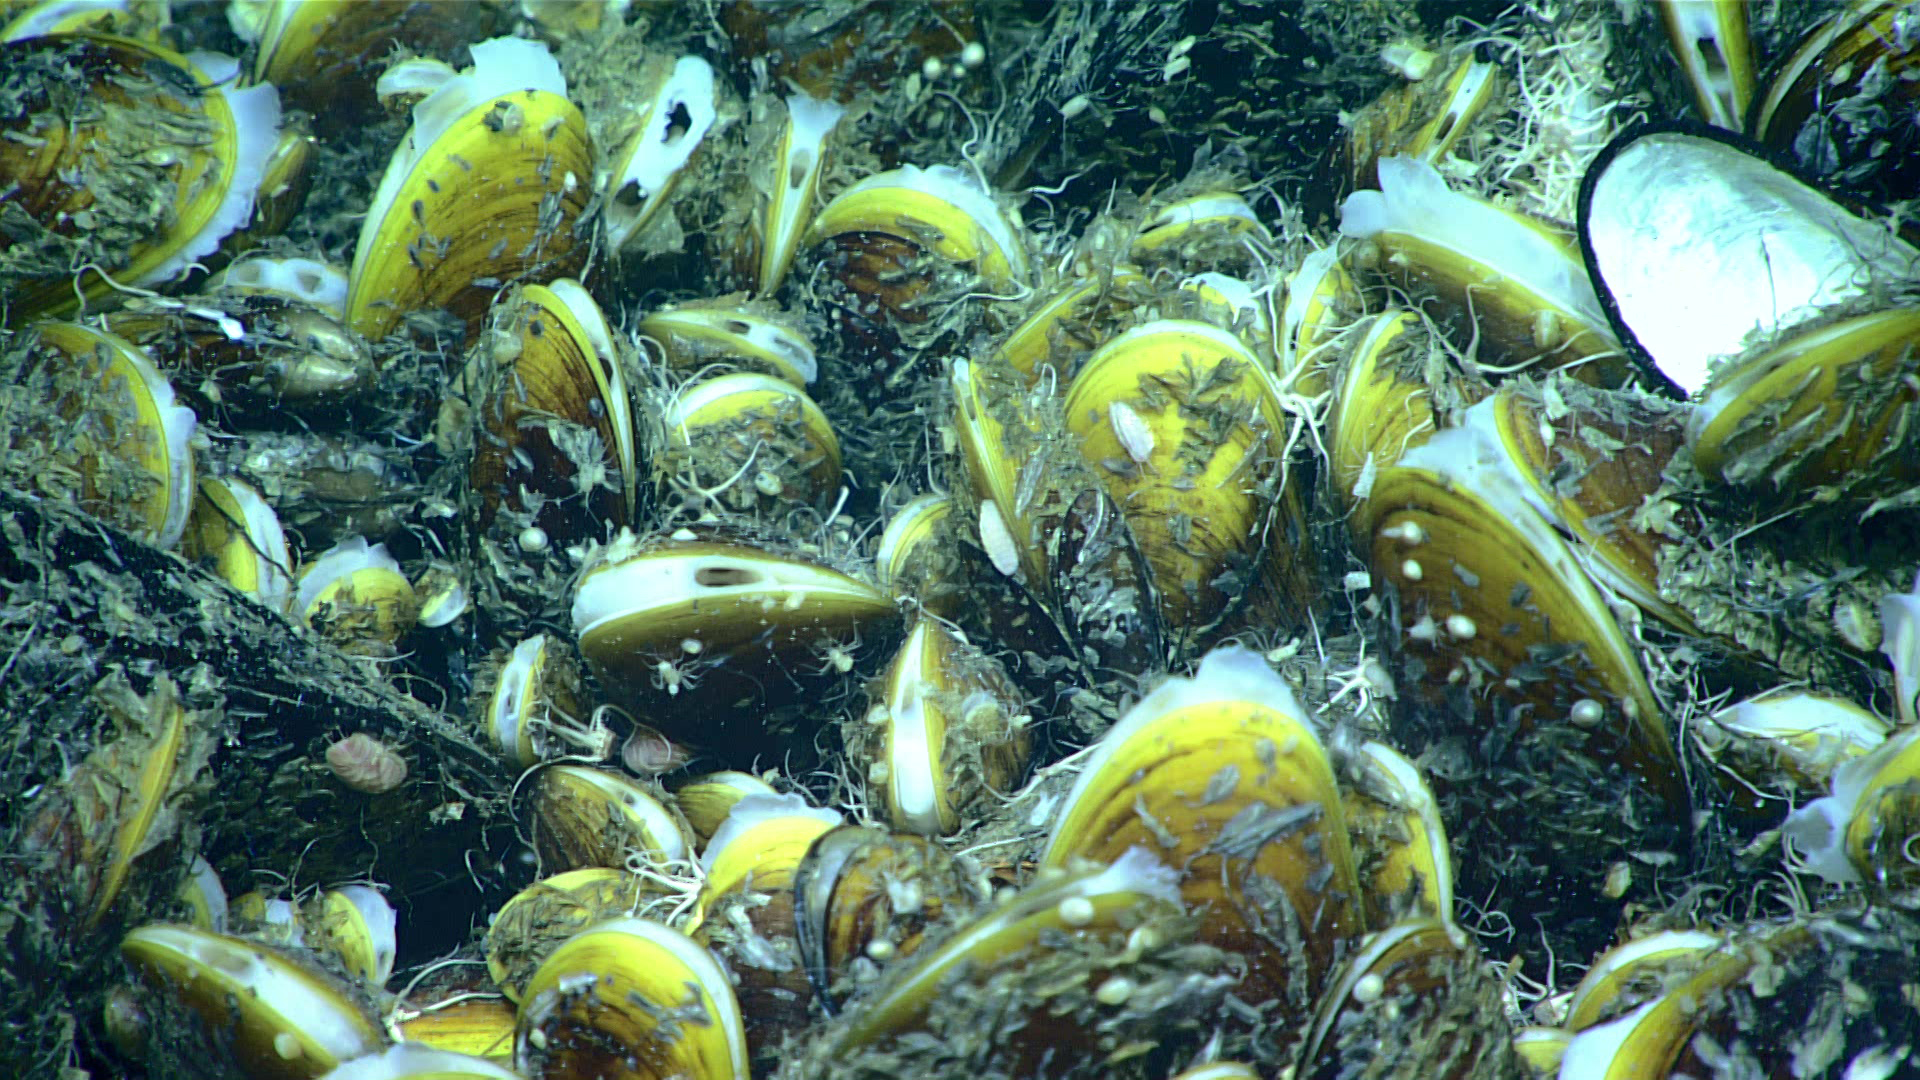 Bathymodiolus mussels are common members of chemosynthetic communities. These mussels have a symbiotic relationship with chemosynthetic bacteria living in their tissues. In turn, beds of Bathymodiolus mussels often support a huge variety of invertebrates, including sea stars, scaleworms, and limpets.